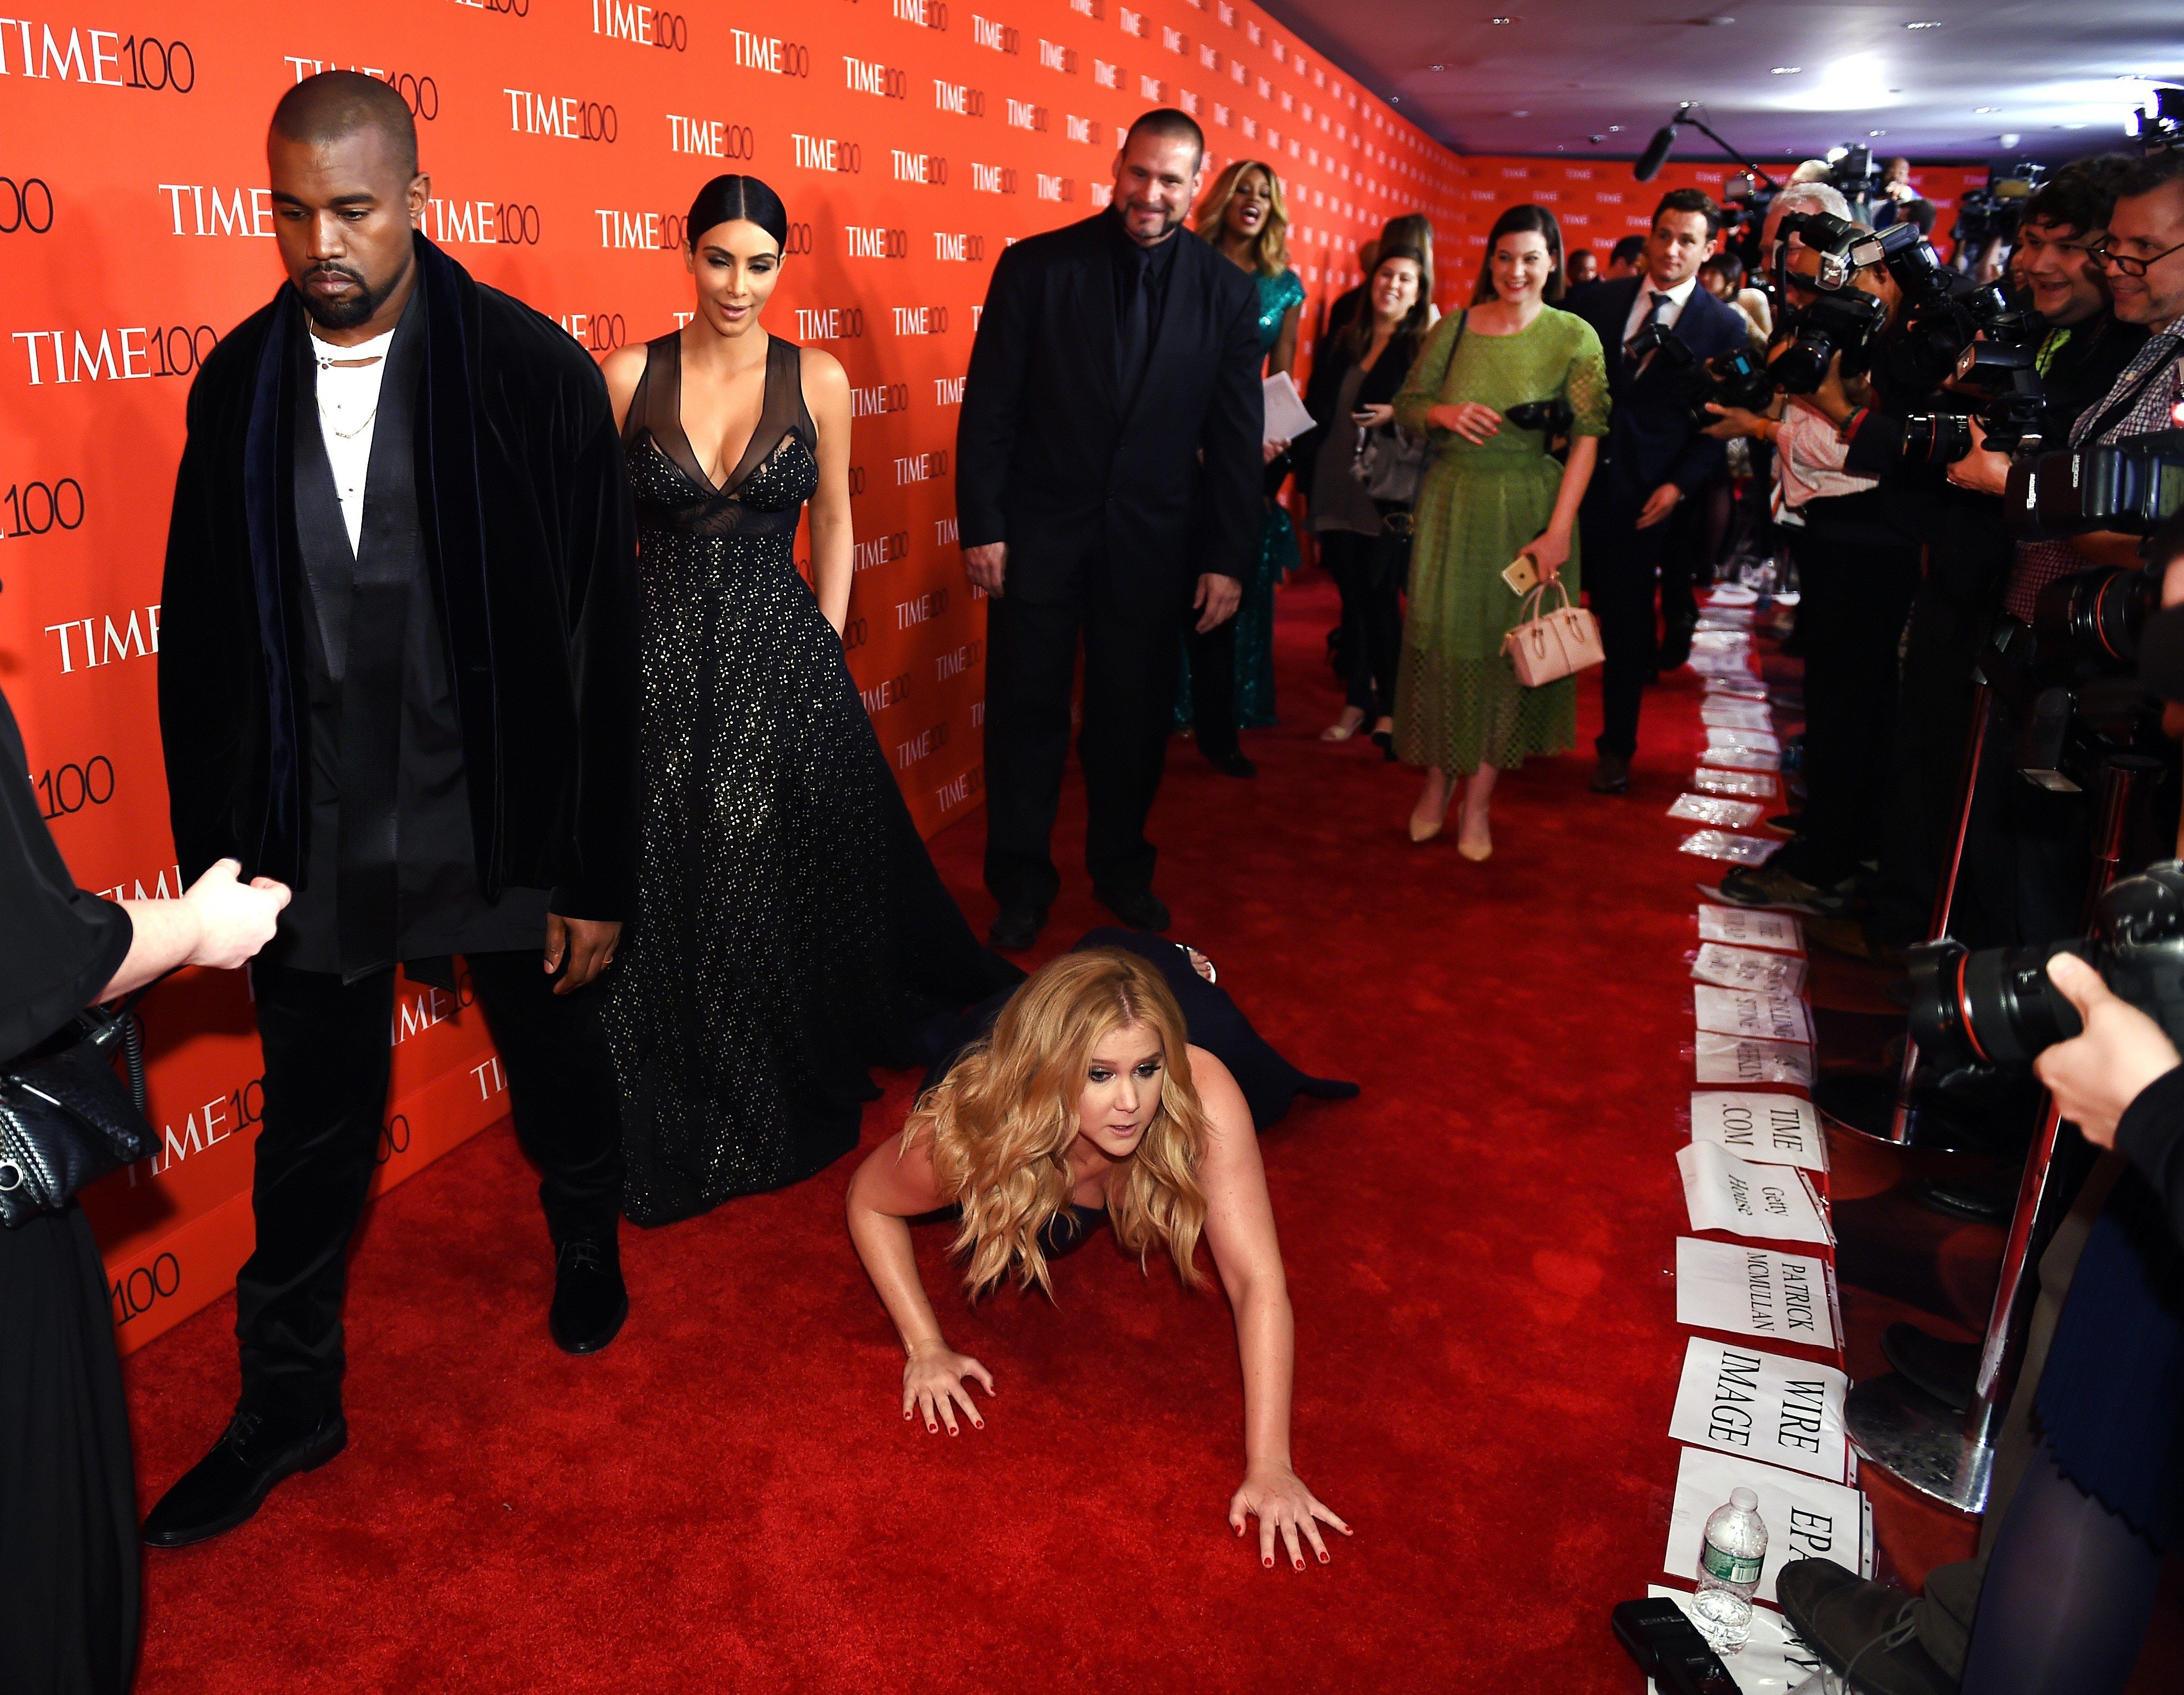 Red Carpet Fails - Embarrassing Red Carpet Moments